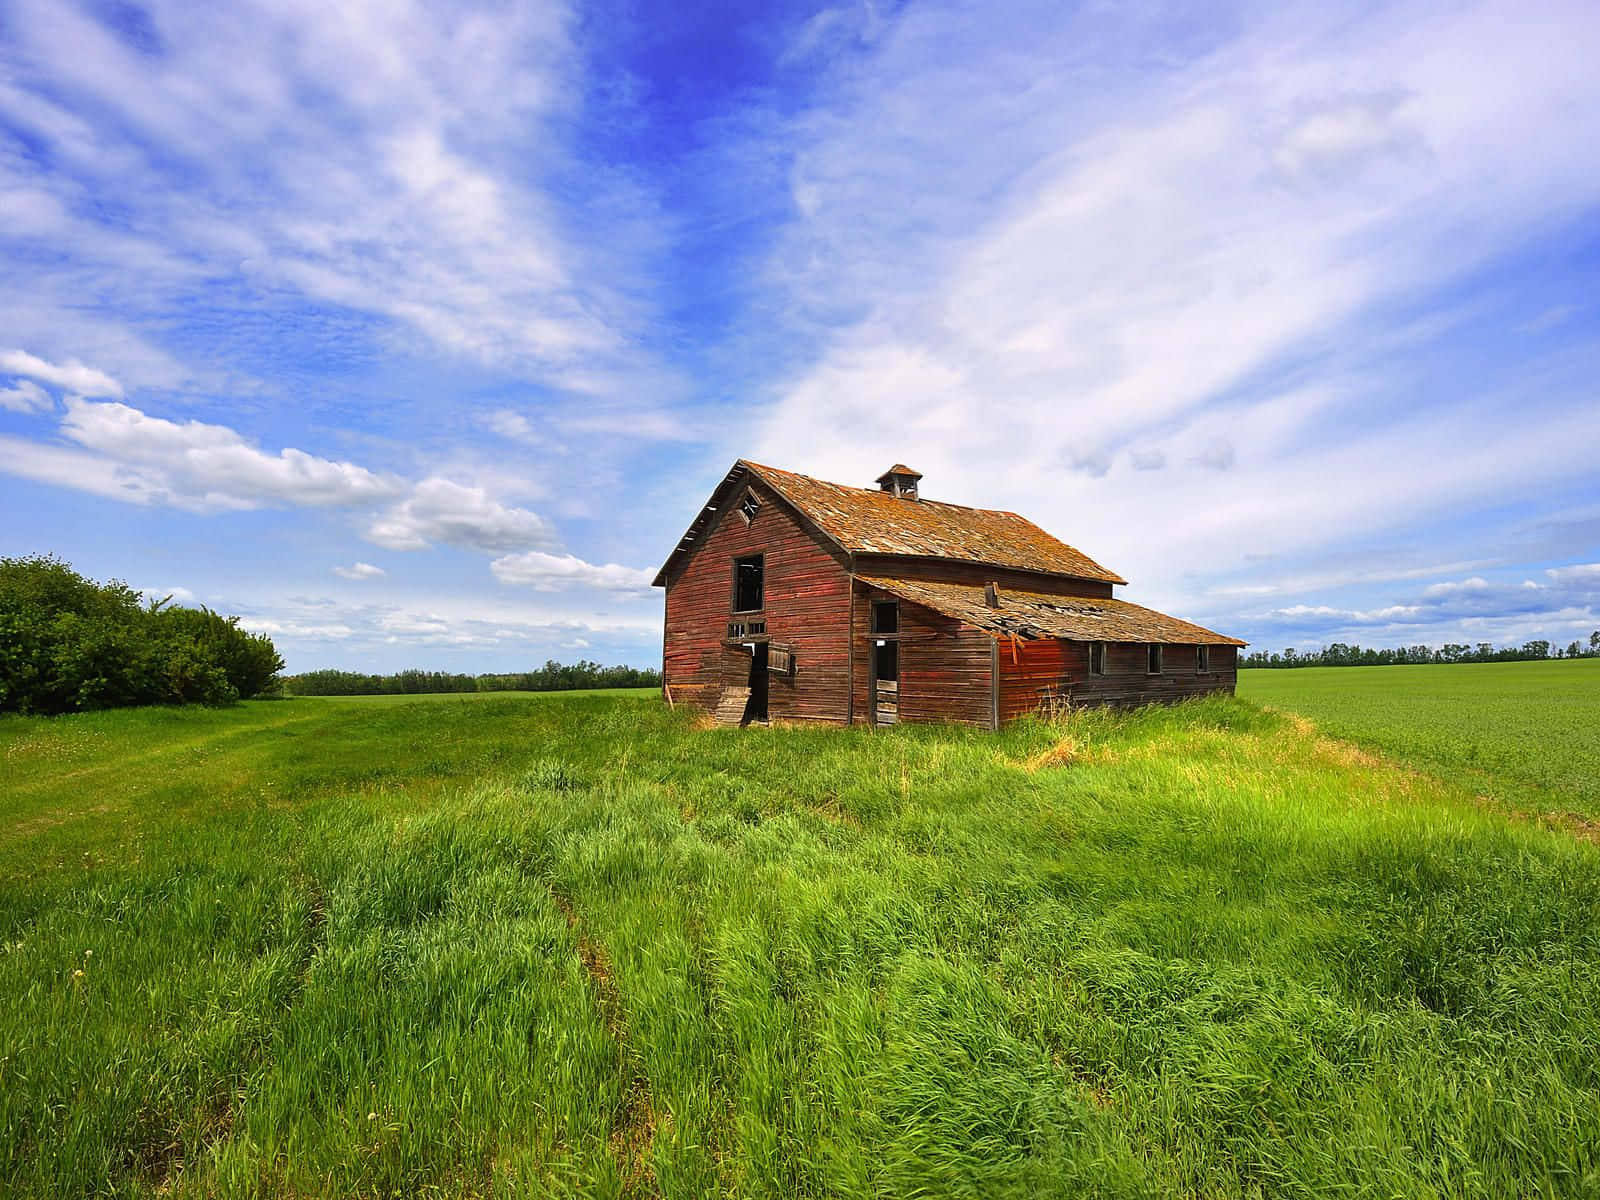 A rustic barn in the countryside of the United States